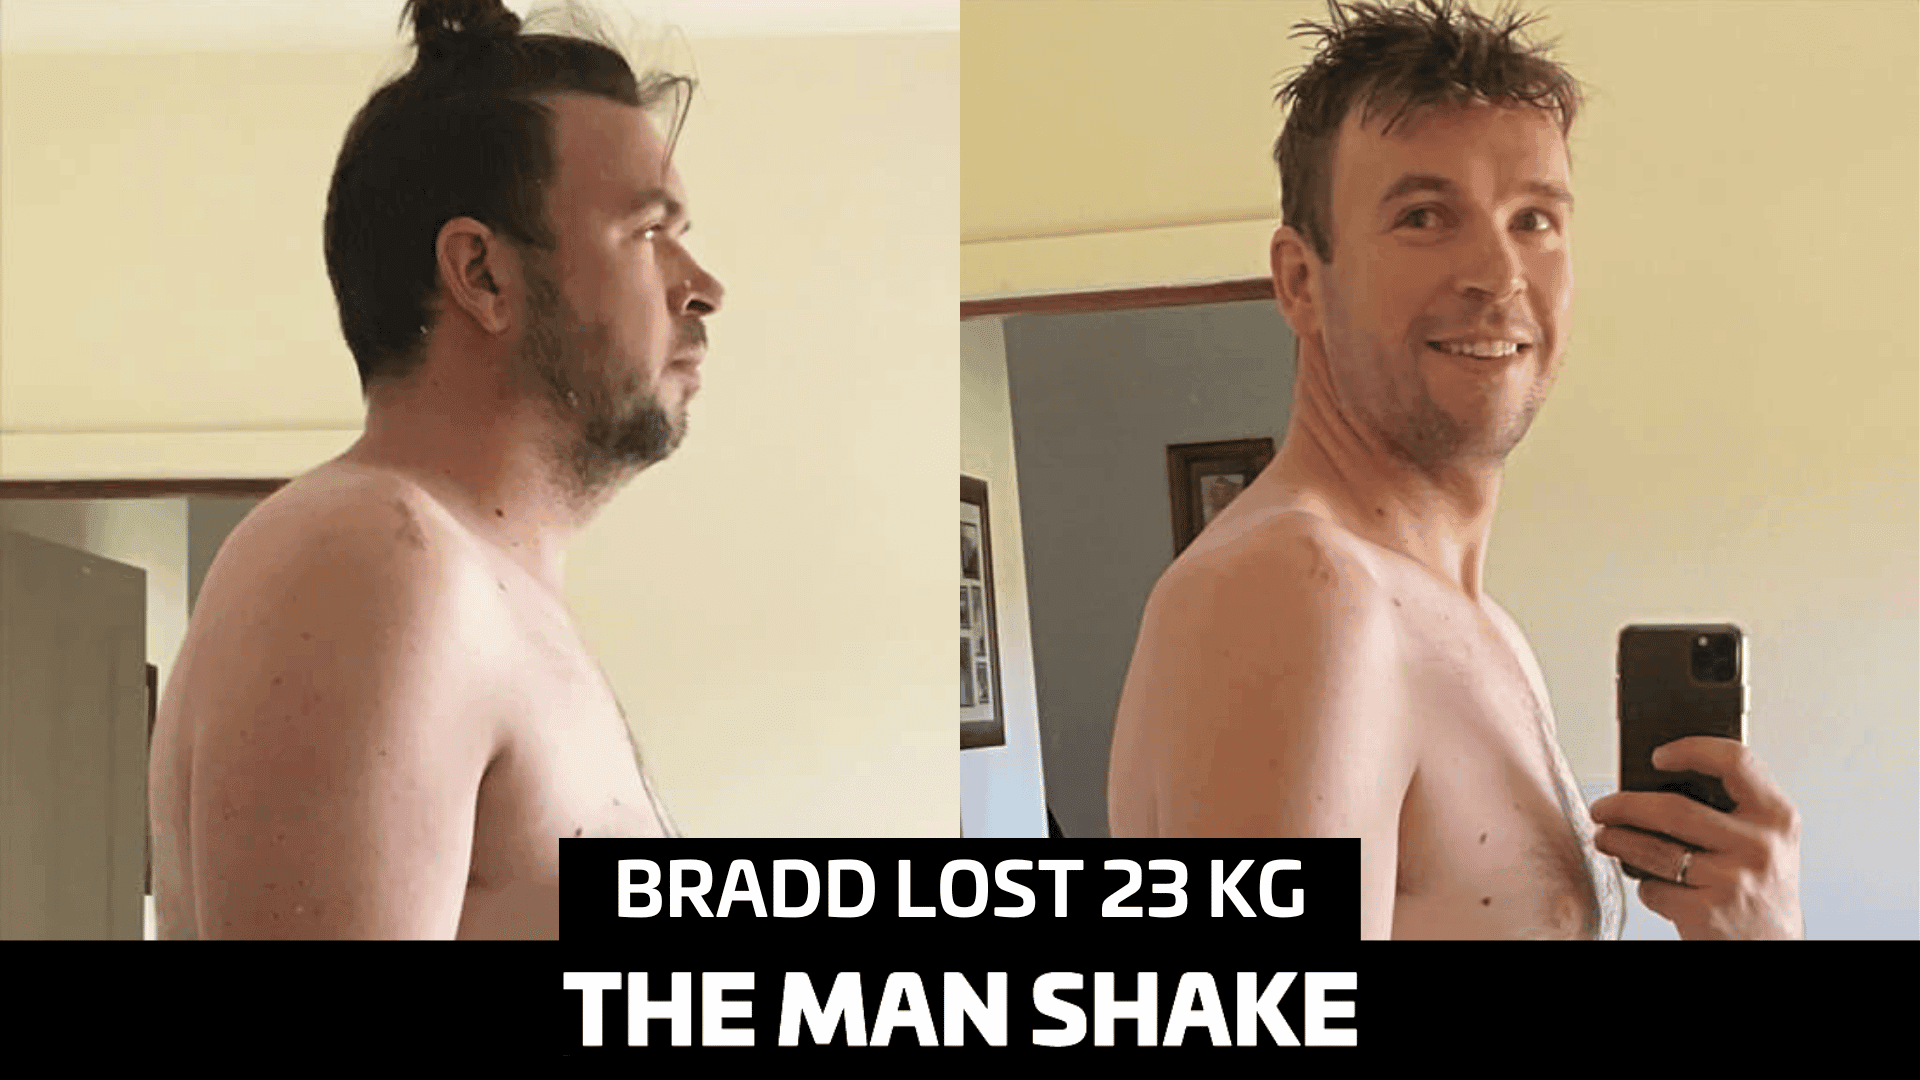 Bradd took control and lost 23kg